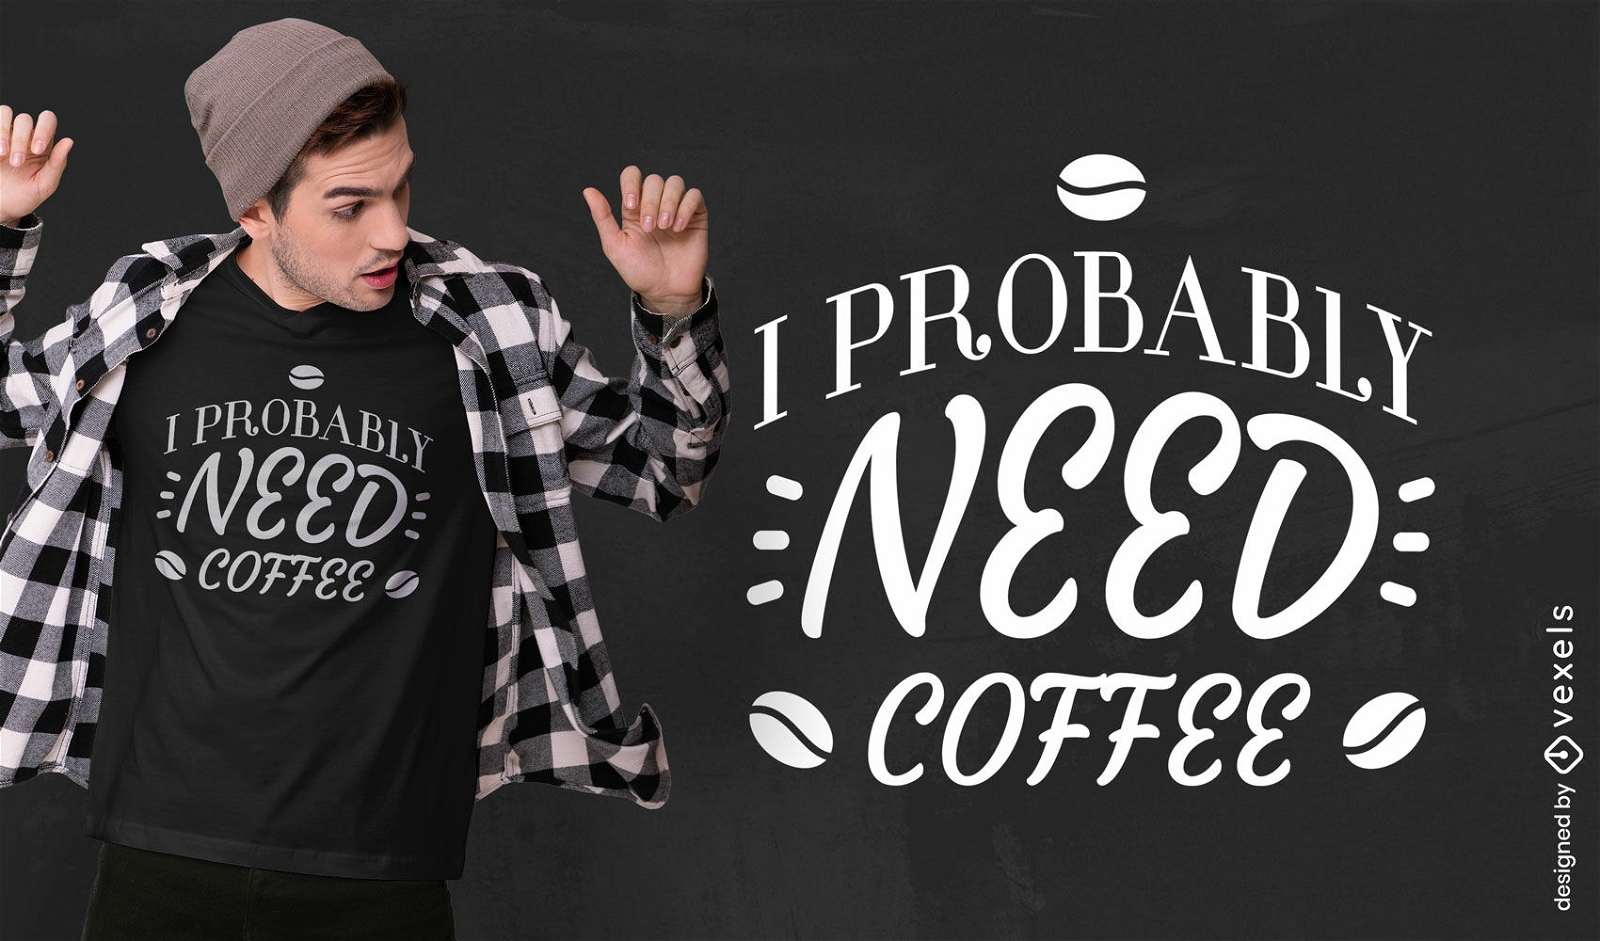 Need coffee drink quote t-shirt design